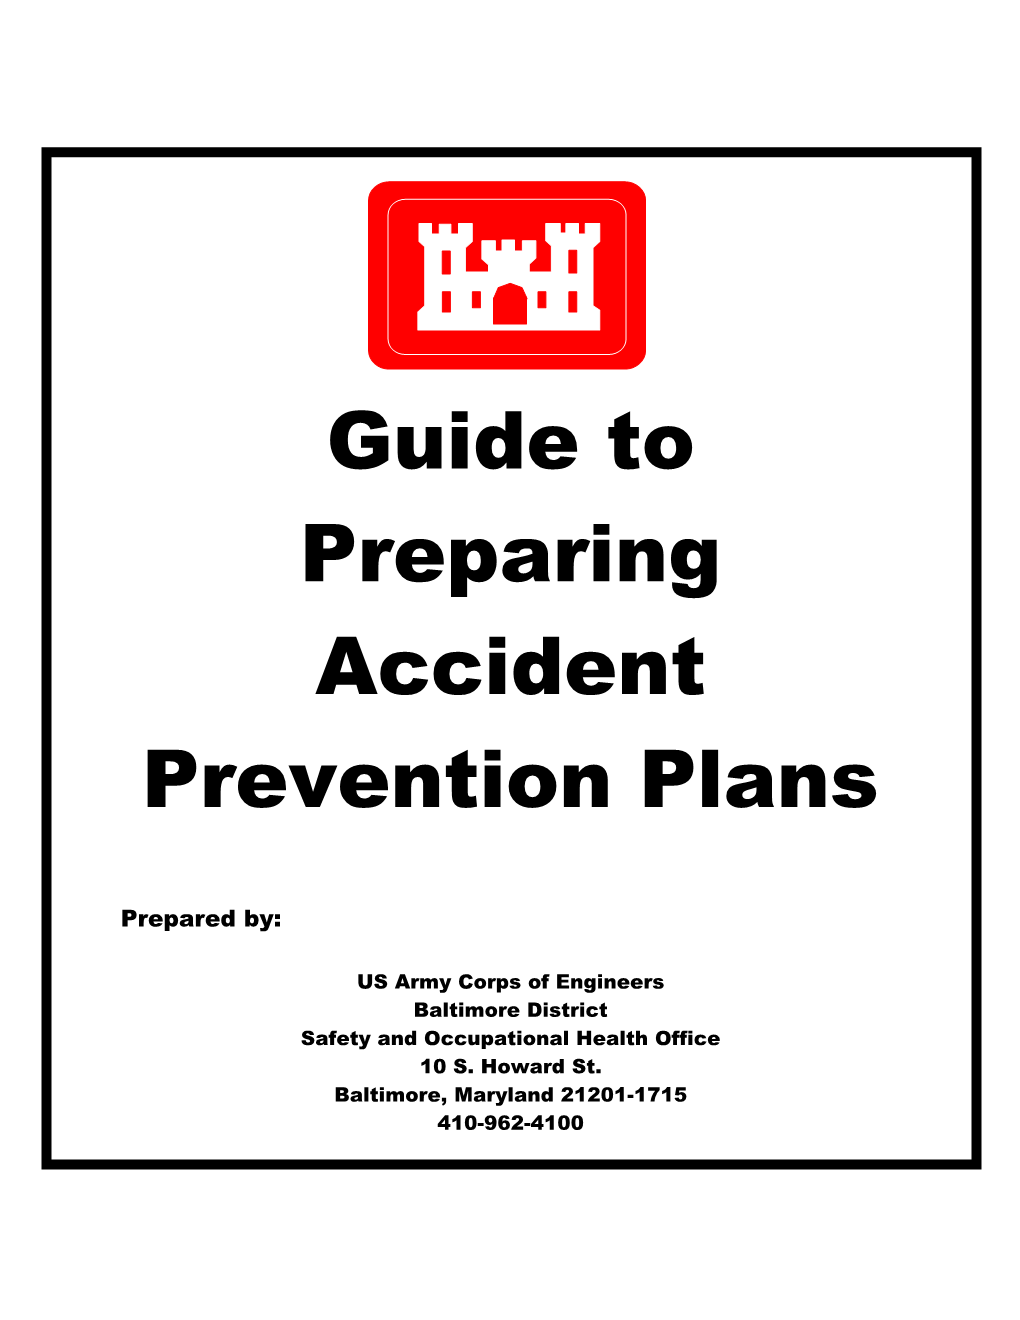 Guide to Preparing Accident Prevention Plans